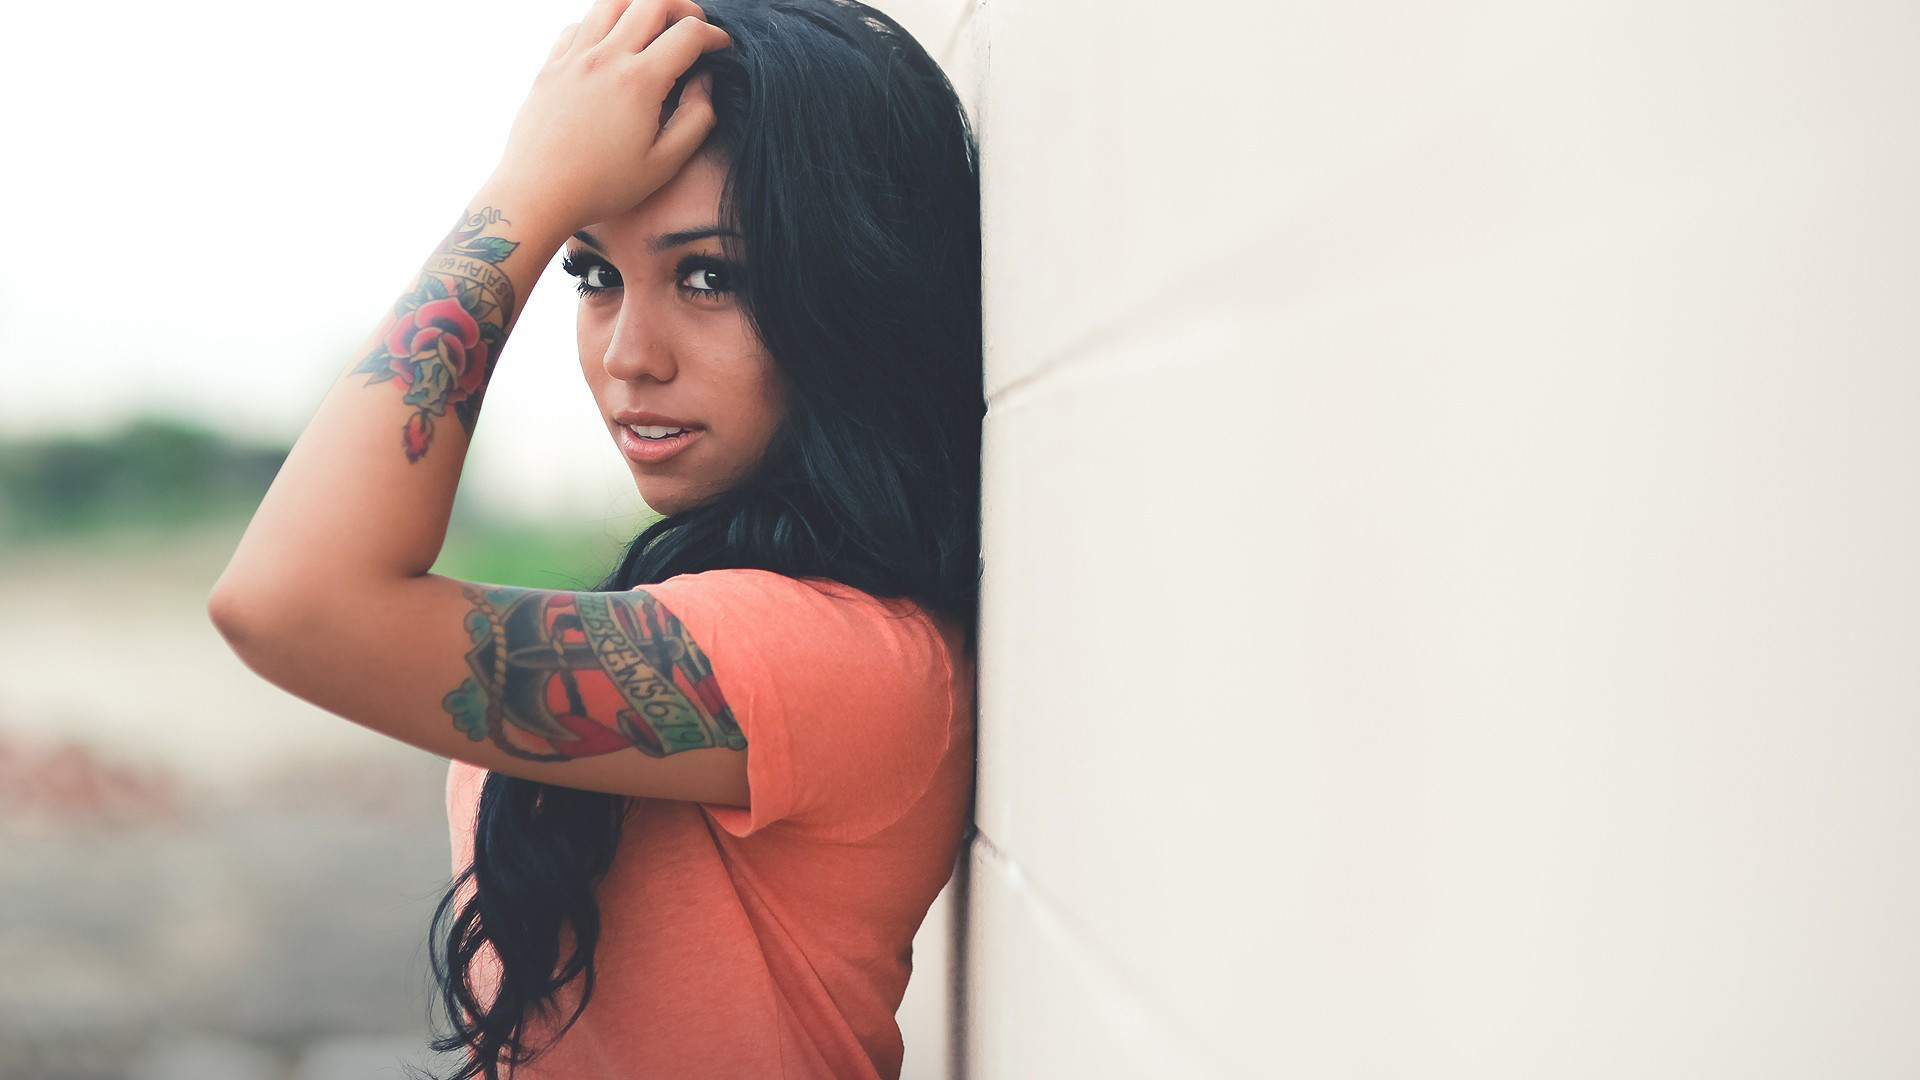 Tattoo Girl HD Wallpapers. Tattoo Girl Pictures